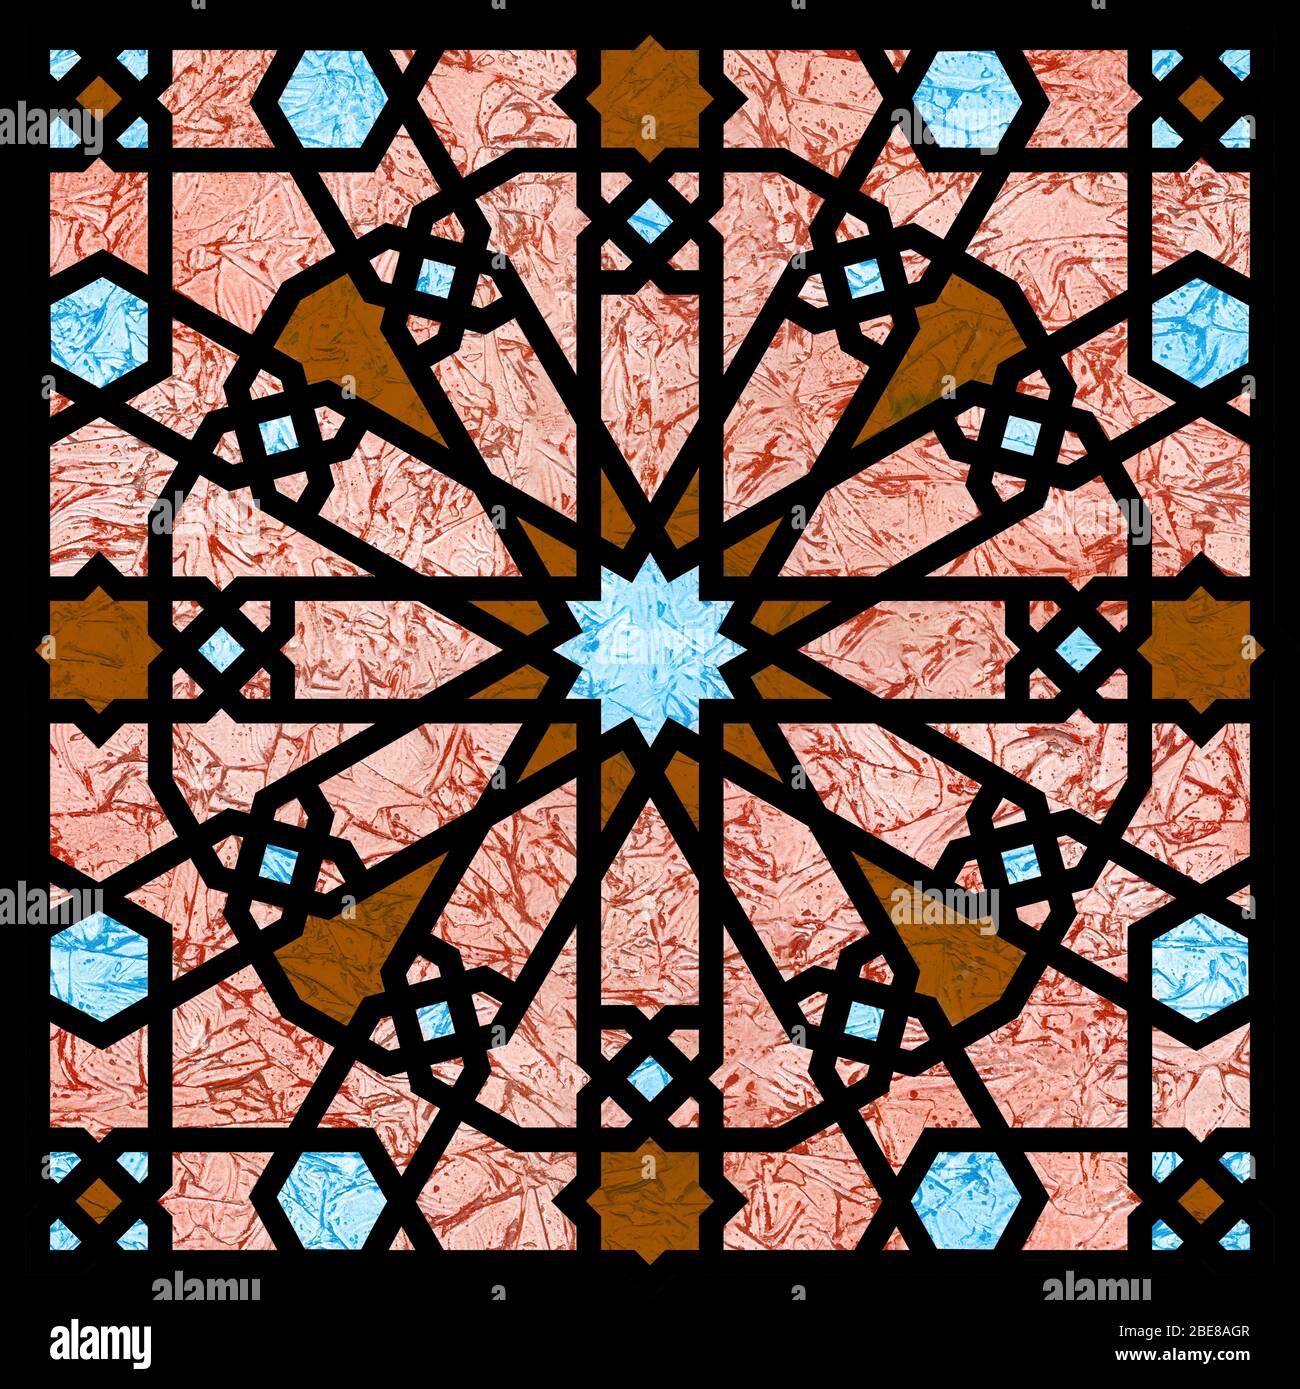 Islamic, arabic square tile textured with rich texture. Stock Photo